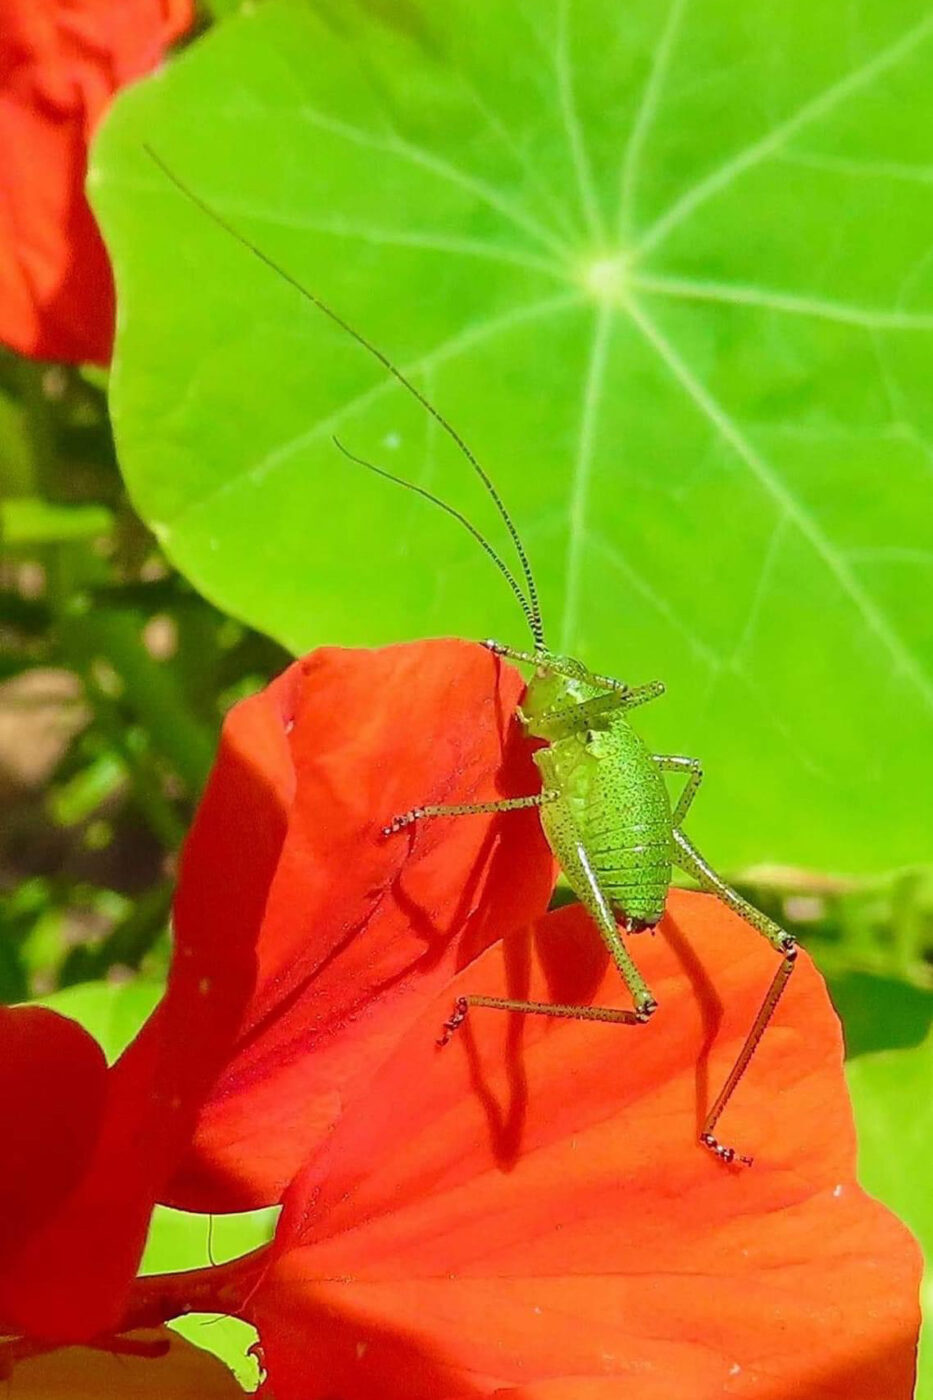 In this photograph is a beautiful grasshopper relaxing on a vibrant sea of green and red coloured foliage.